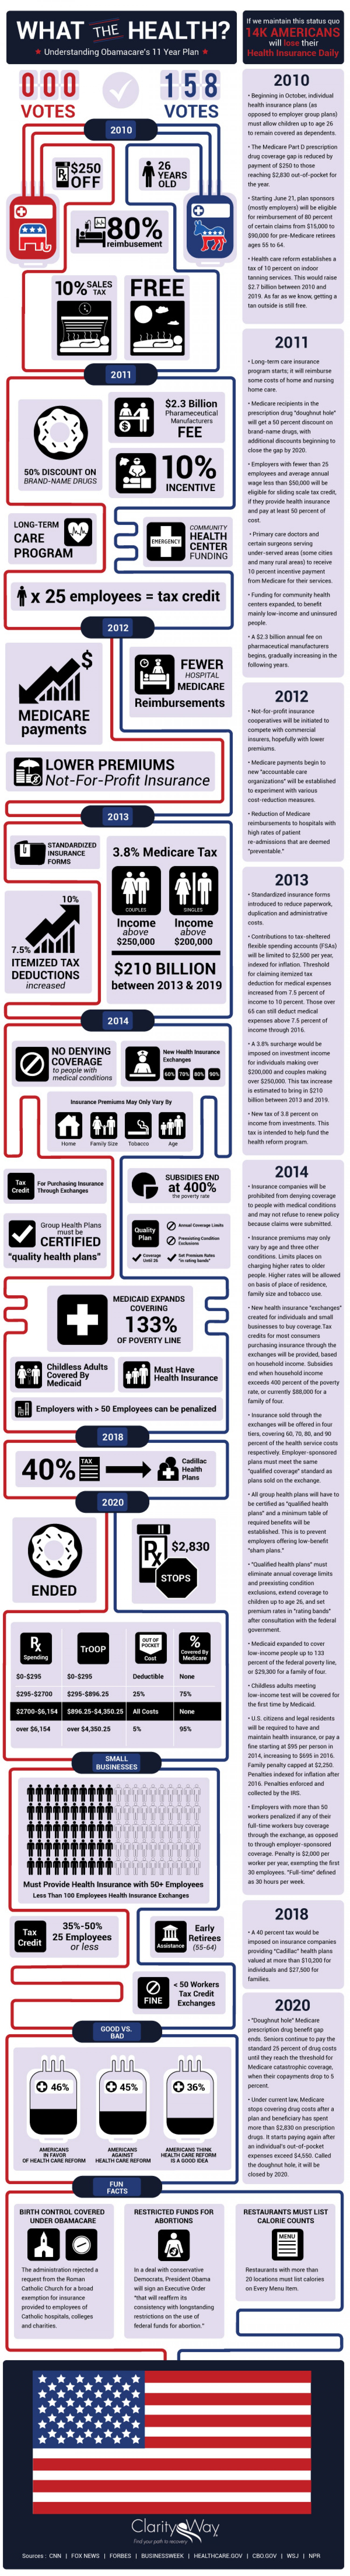 What the Health? Understanding Obama's 11 Year Plan for Health Reform